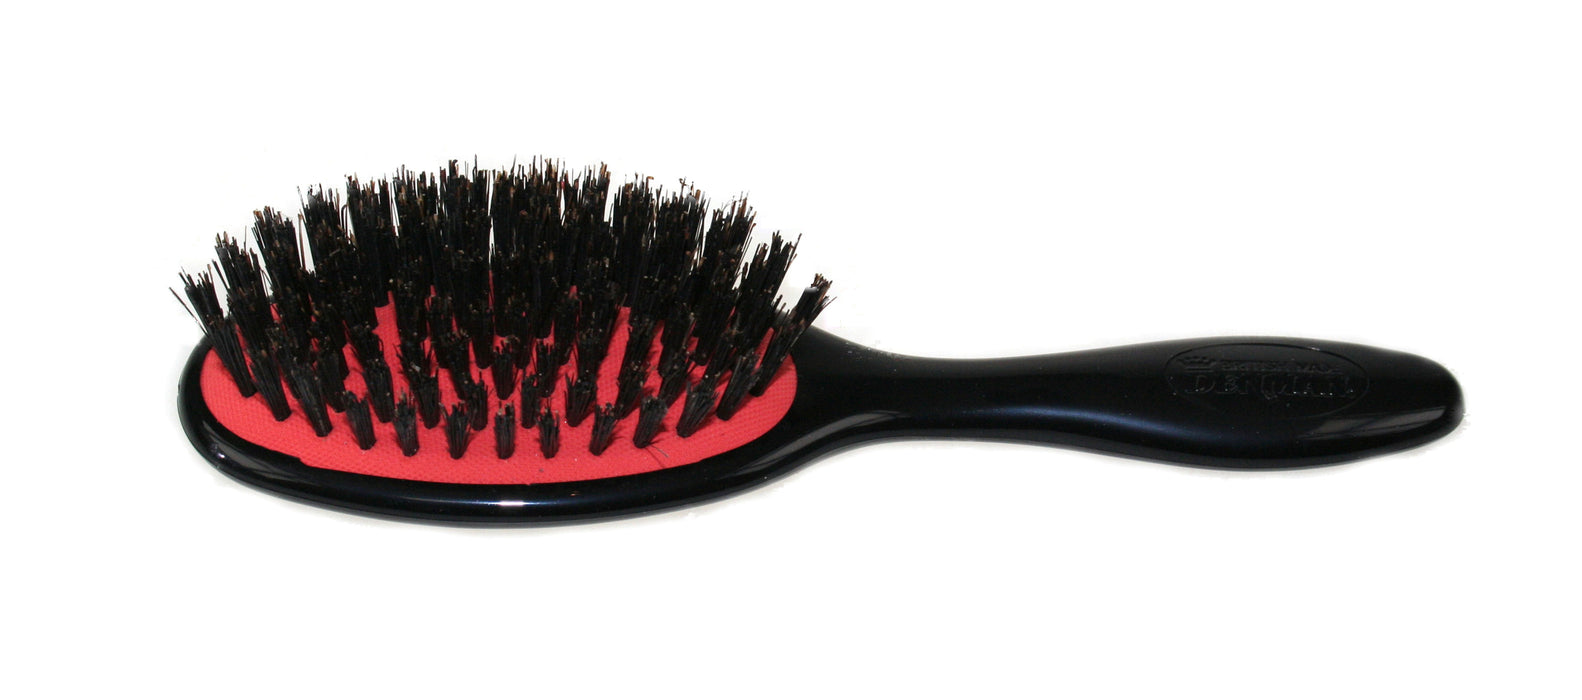 Denman D82 Boar Bristle Grooming Hair Brush with Natural Bristles (select size)